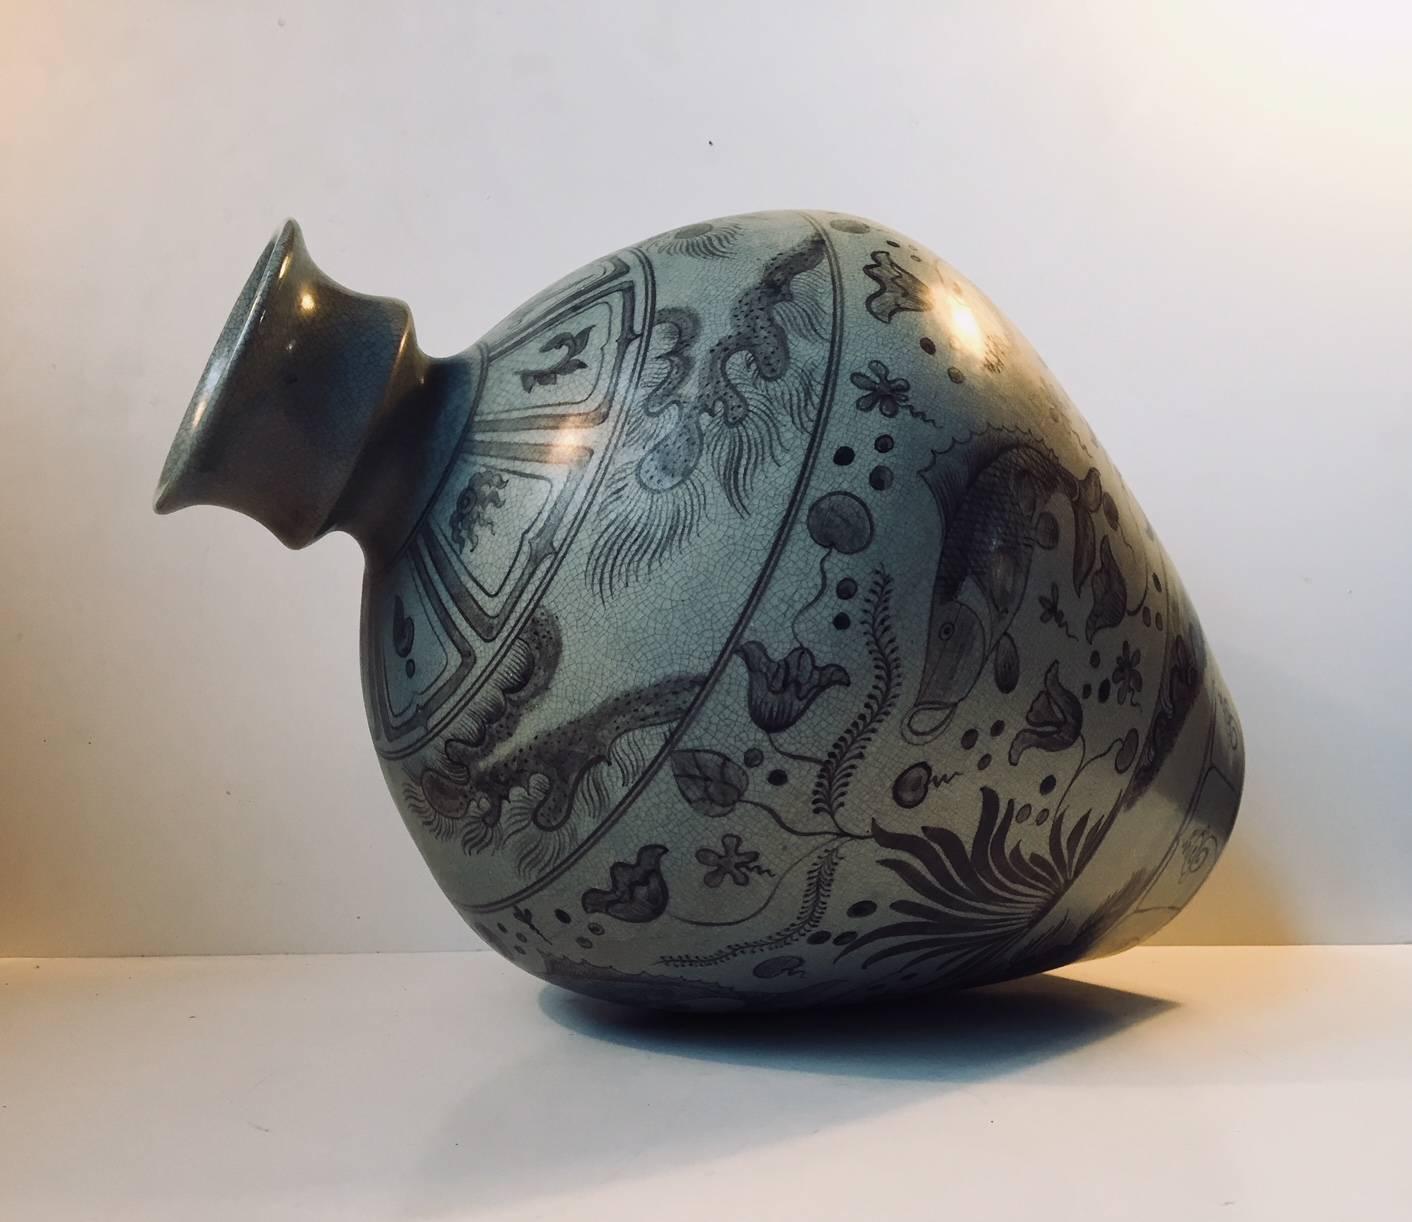 Large balloon shaped vase in grey craquele glaze decorated with hand-painted black motif's of fishes and flowers. Created by Lyngby Porcelæn in Denmark during the 1930s.